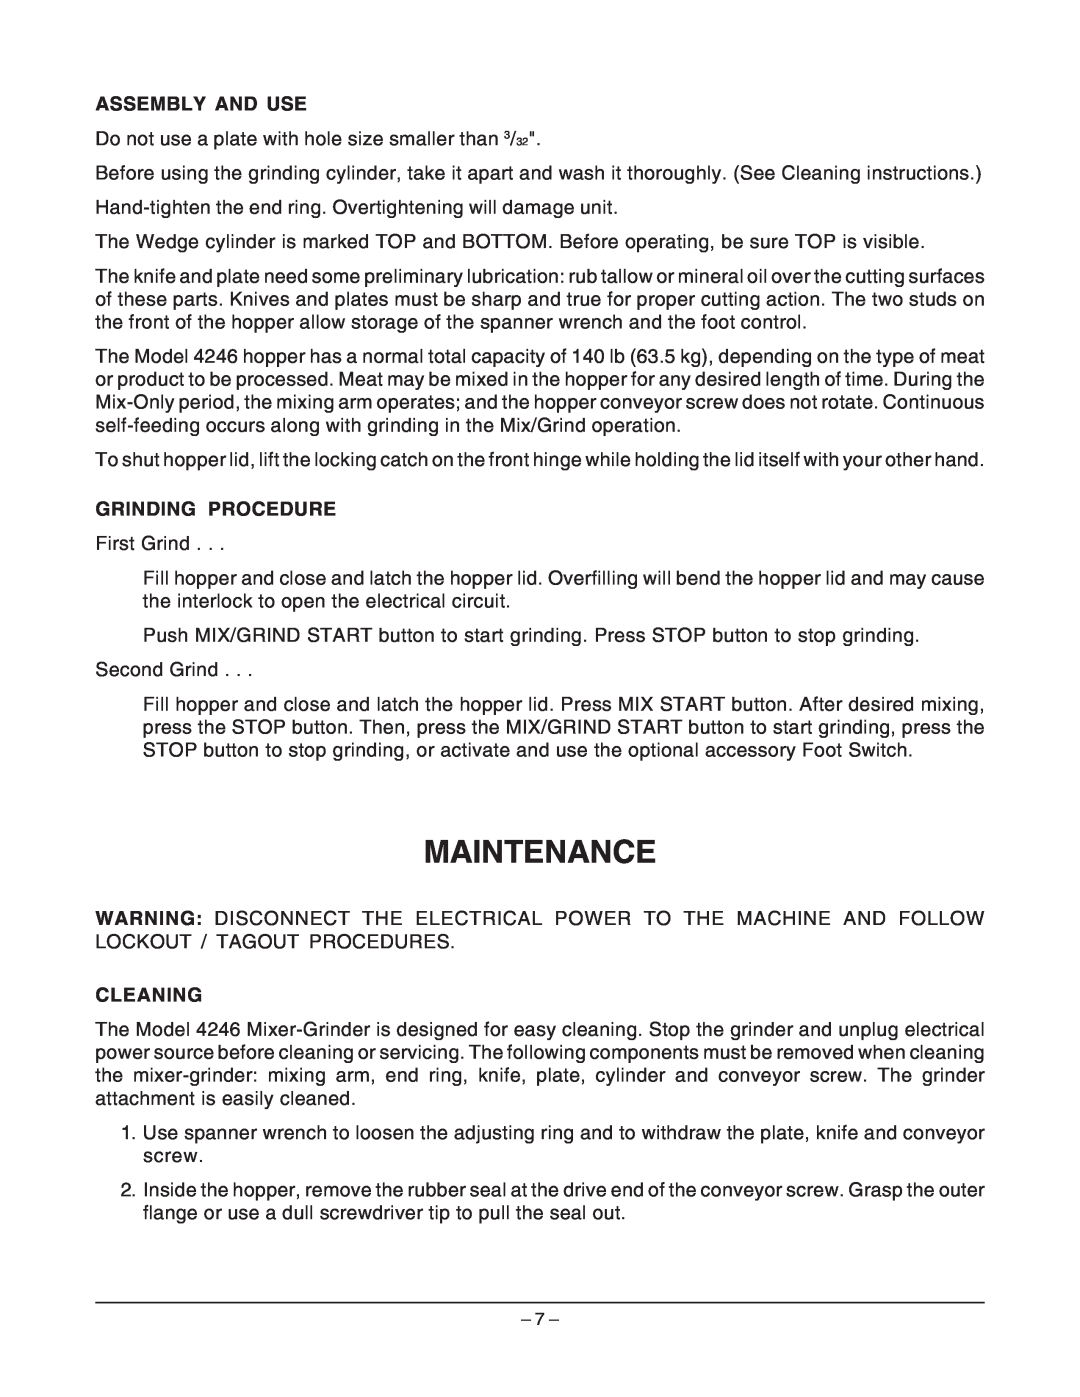 Hobart 4246 manual Maintenance, Assembly And Use, Grinding Procedure, Cleaning 